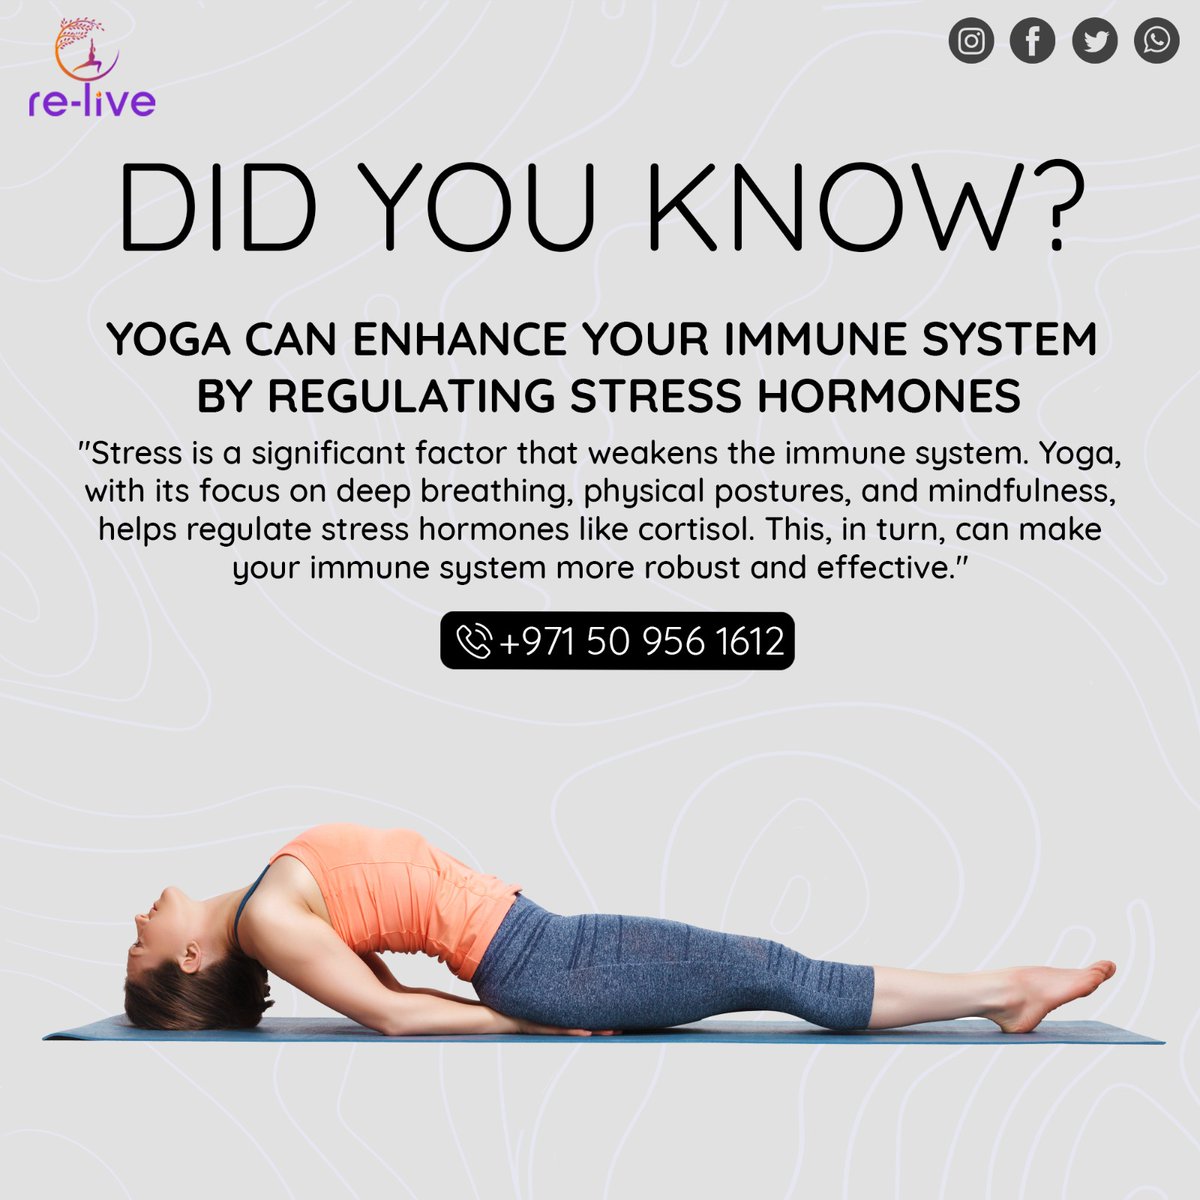 Did You Know Yoga Can.... ???

Yoga can enhance your immune system by regulating stress hormones.

Check Out Below to Learn More: +971 55 535 2235

.
.
.

#yoga #yogalife #yogabody #yogaoutside #yogaday #yogafamily #yogajournal #yogalovers #yogagirls #yogaprogress #yogagoals